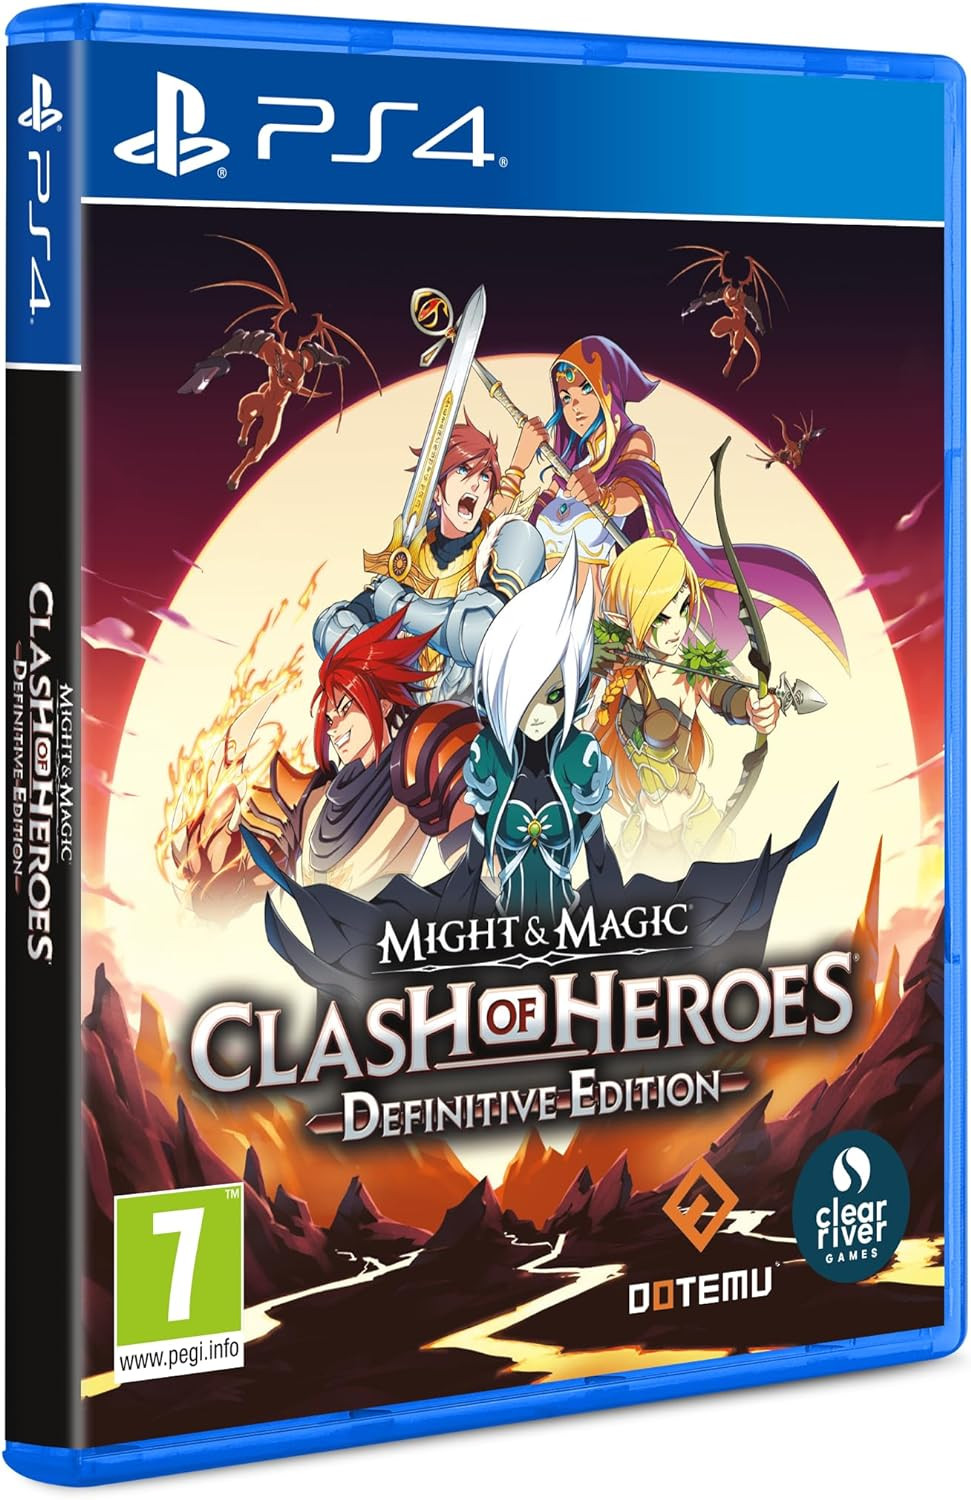 Might & Magic: Clash of Heroes - Definitive Edition (PS4), Clear River Games